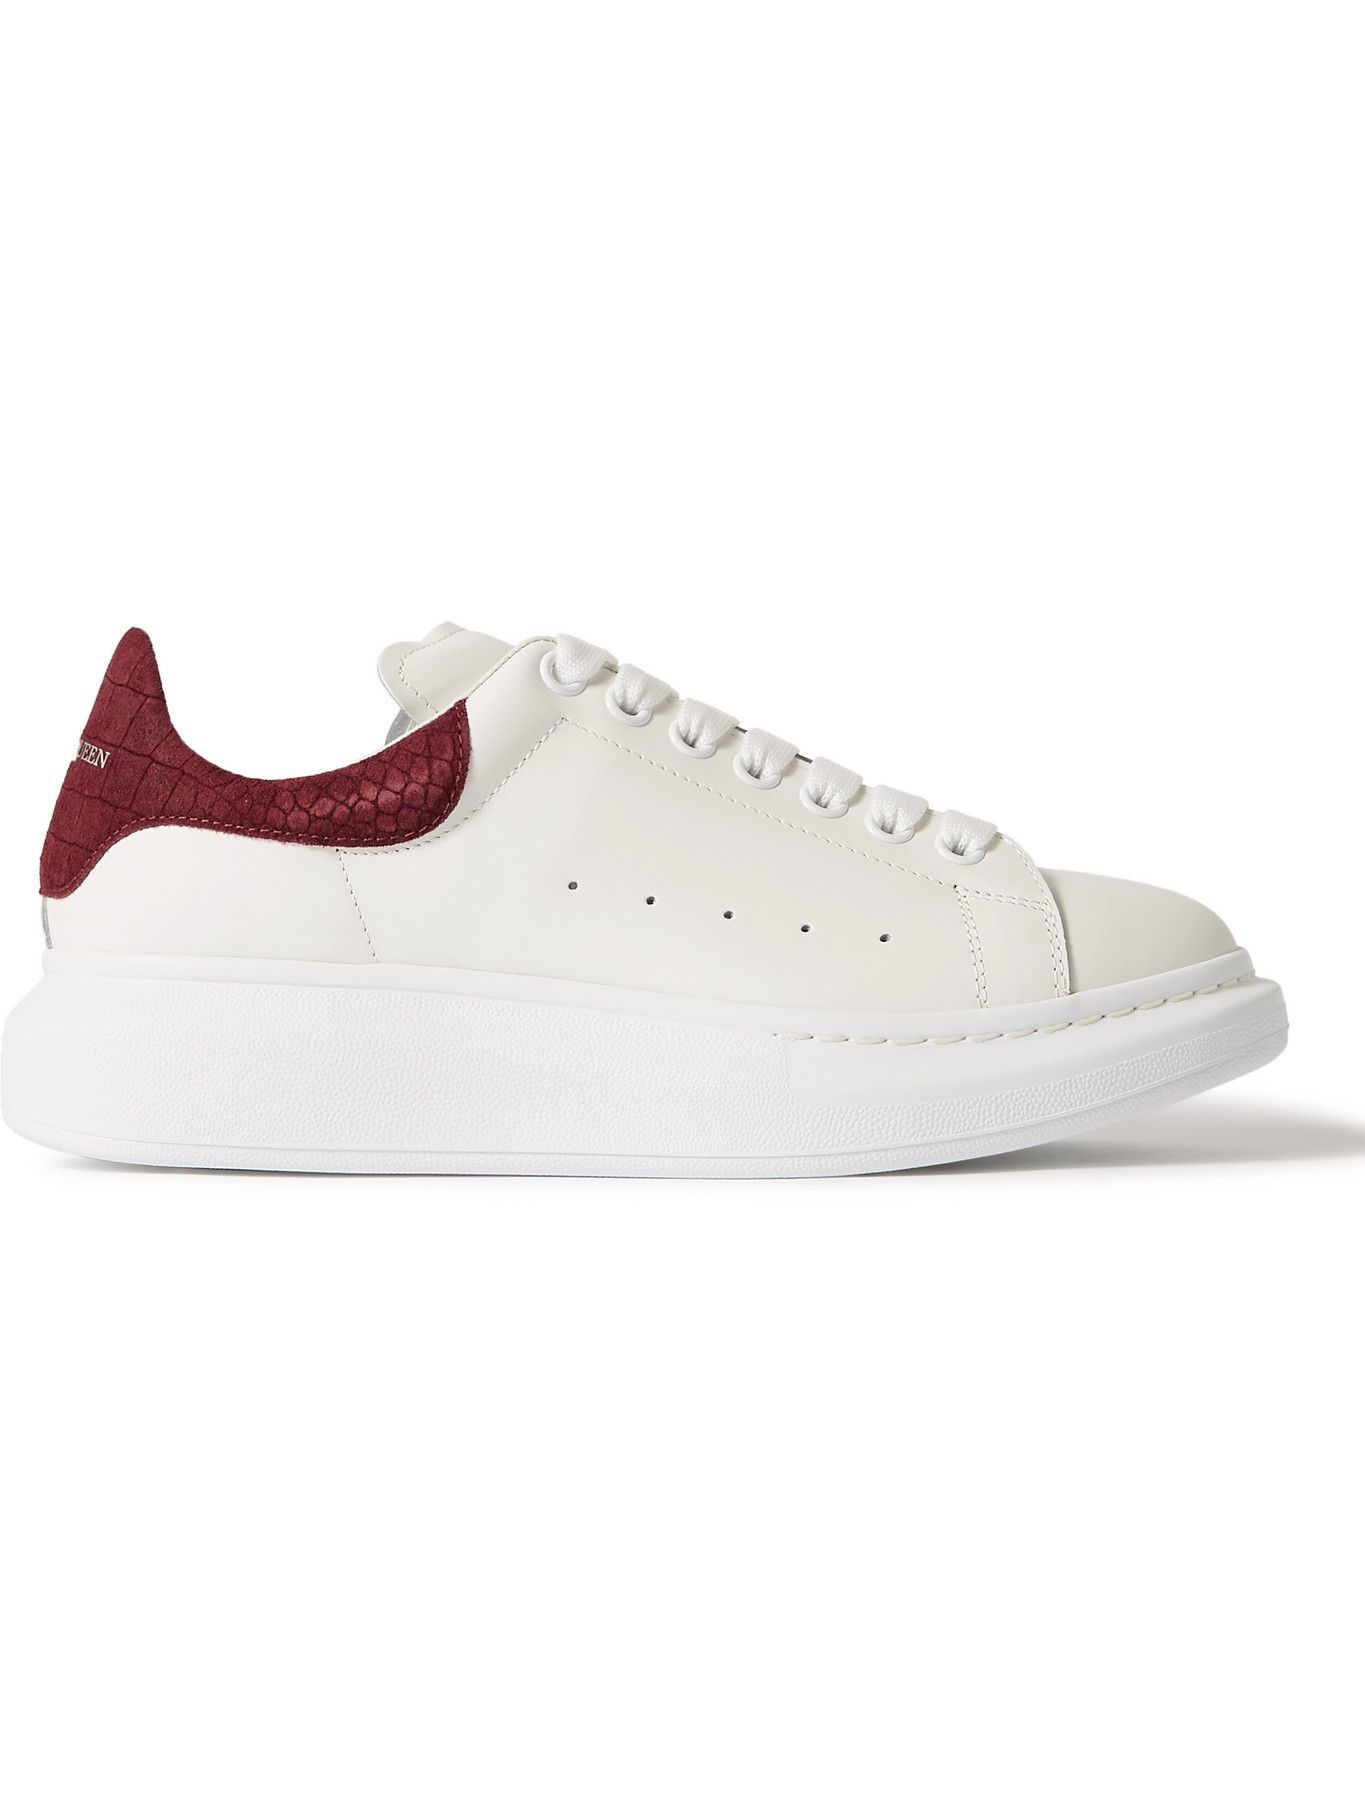 Alexander McQueen - Exaggerated-Sole Croc-Effect Suede-Trimmed Leather ...